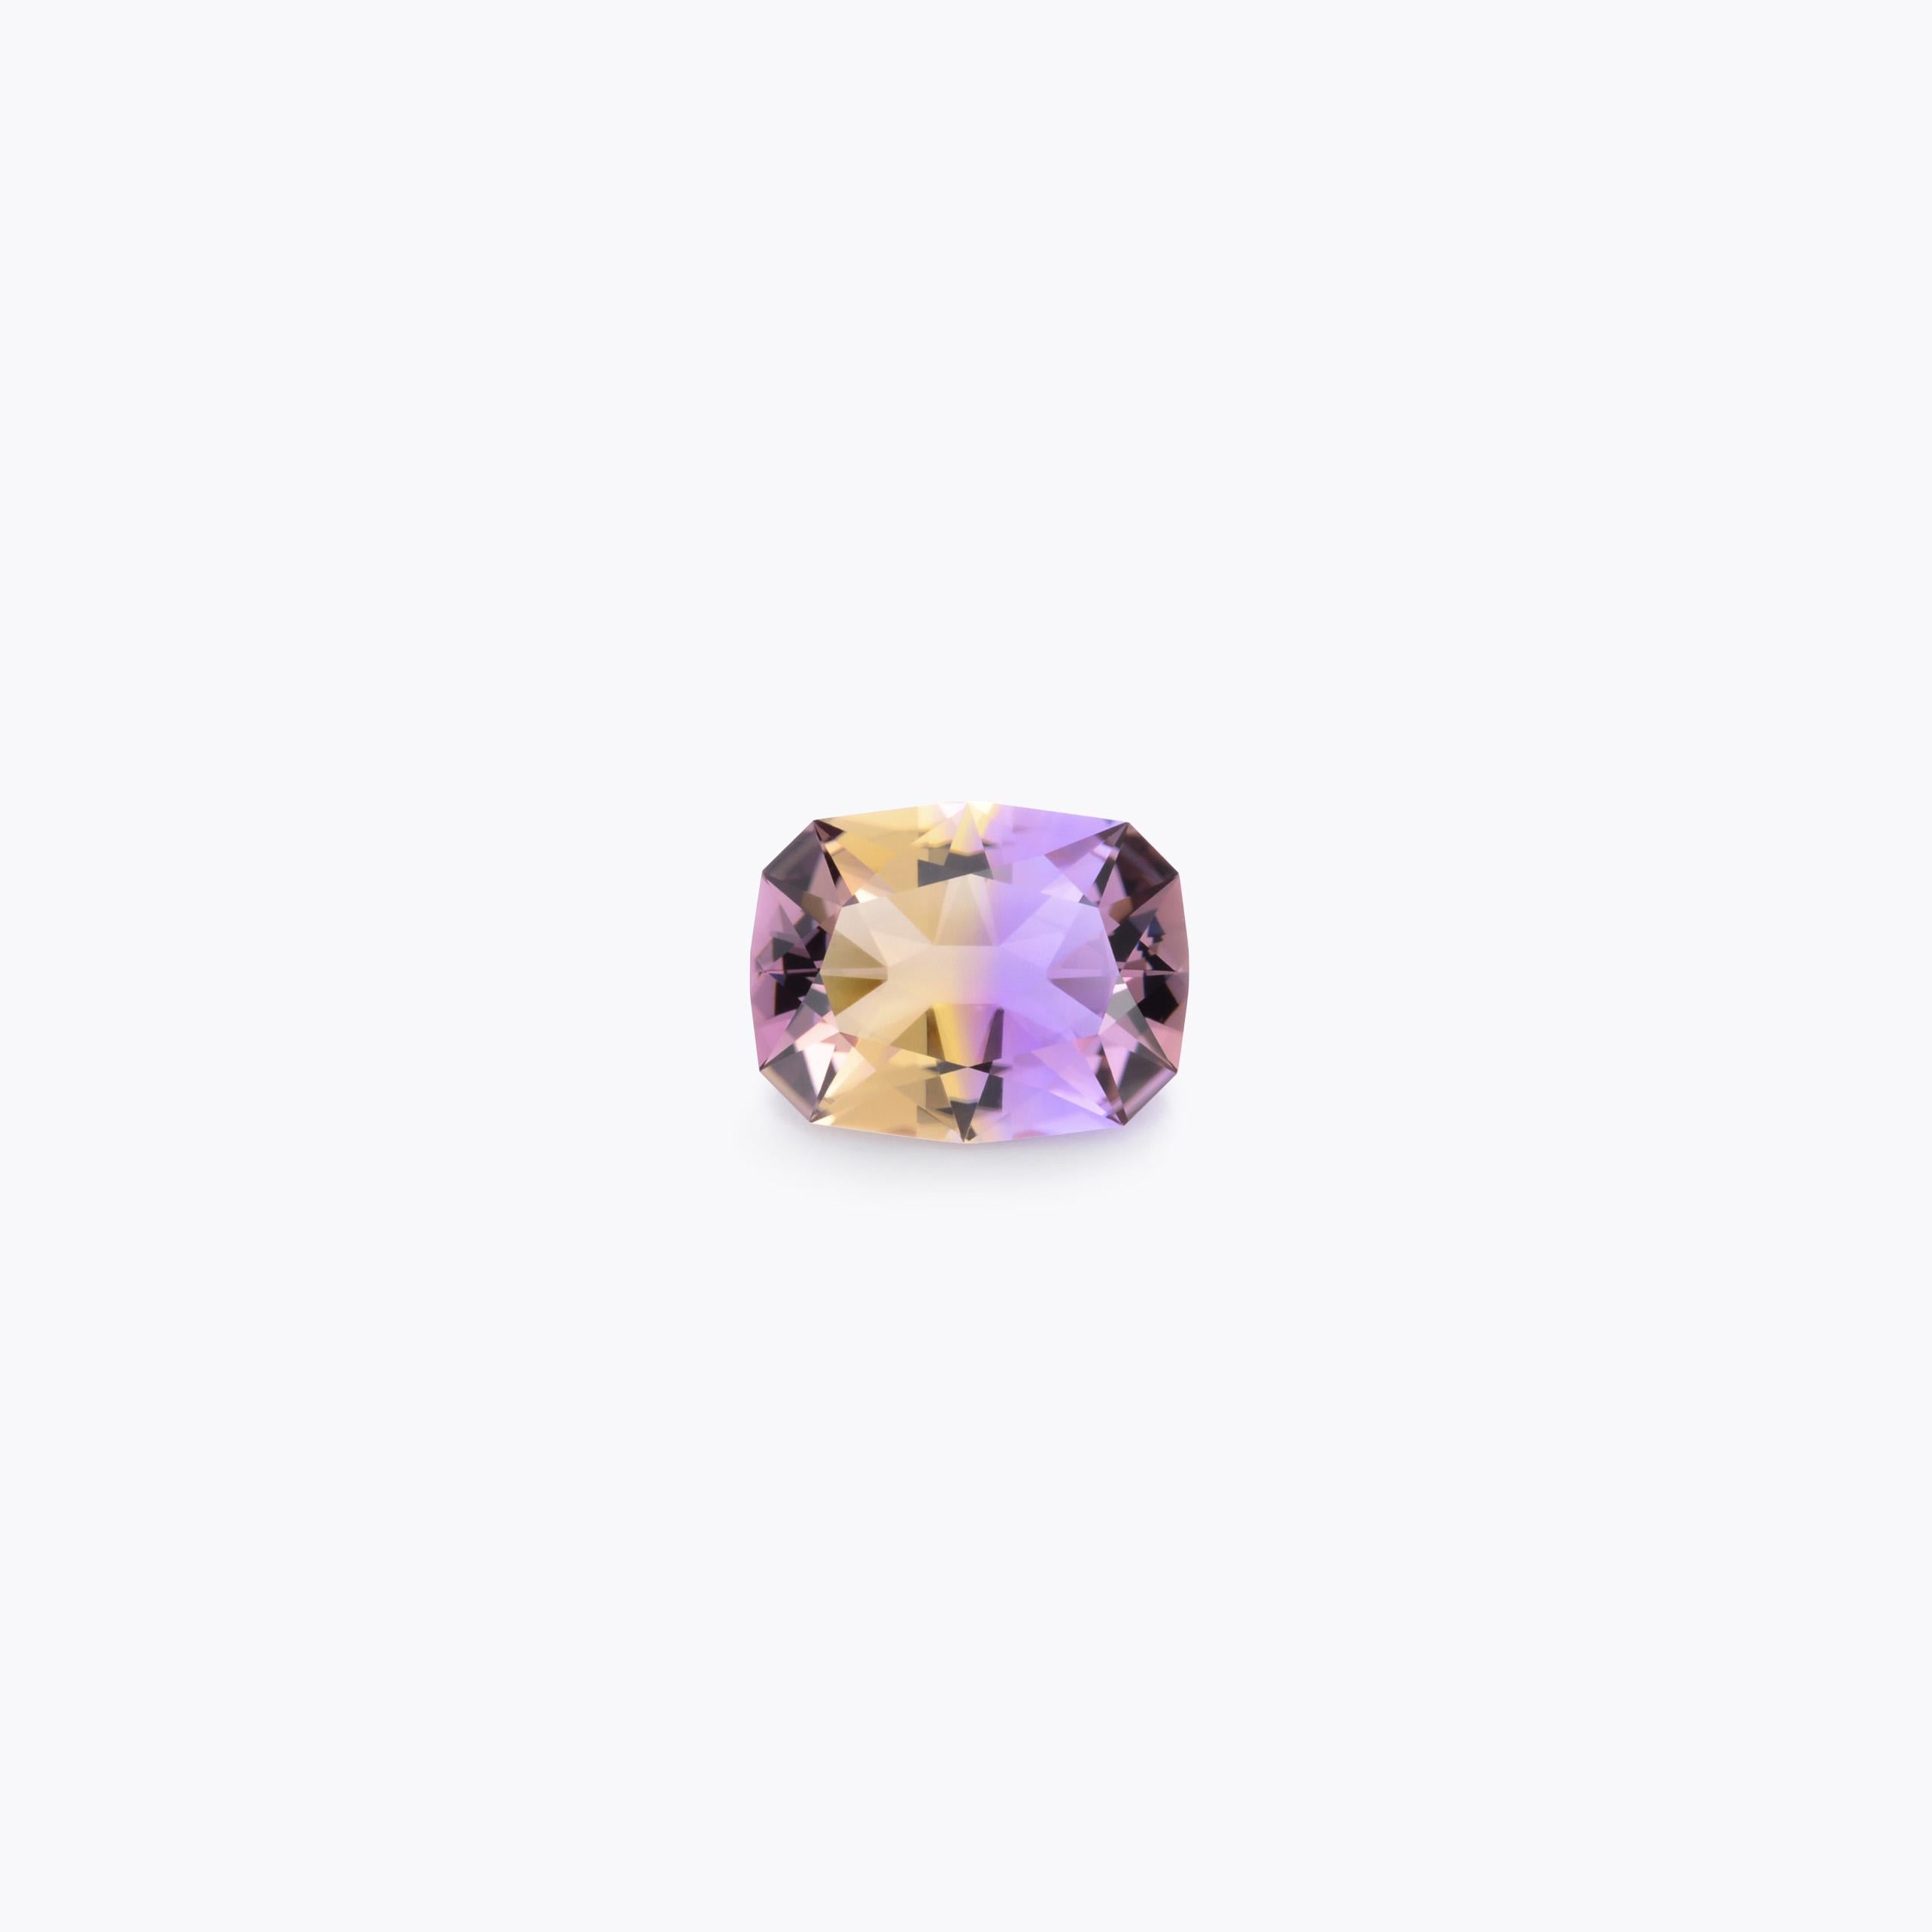 Exclusive 10.77 carat fancy Emerald-Cut Ametrine loose gem, offered unmounted to someone special.
Dimensions: 17.3 x 13.5 x 7.5 mm.
Returns are accepted and paid by us within 7 days of delivery.
We offer supreme custom jewelry work upon request.